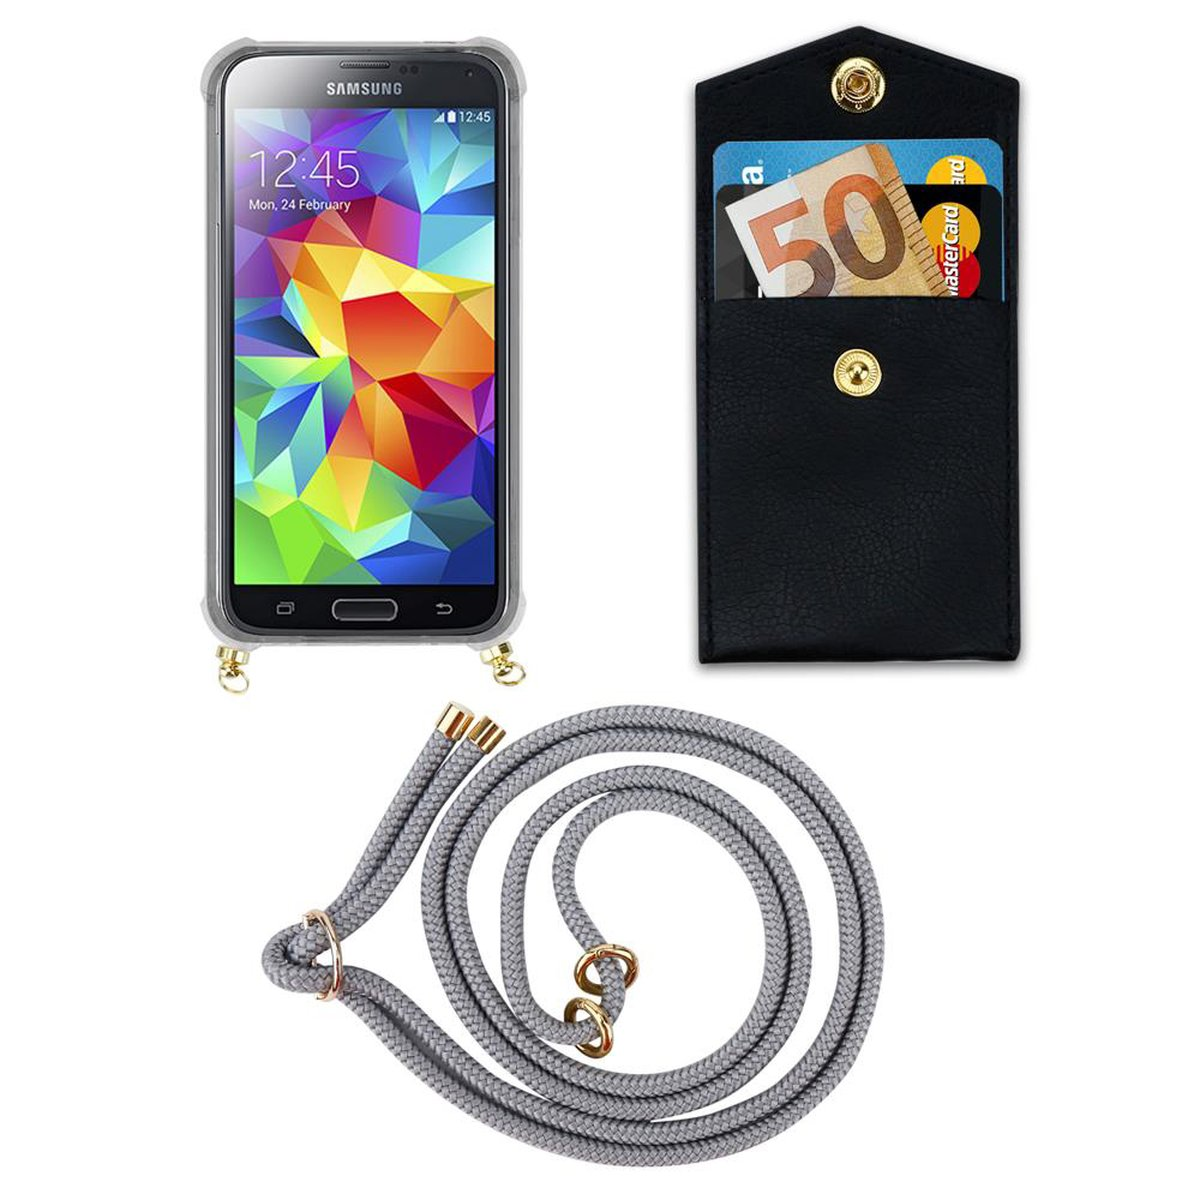 CADORABO Handy und Backcover, S5 Hülle, / SILBER S5 mit abnehmbarer Samsung, Band Ringen, NEO, Kette Kordel Galaxy GRAU Gold